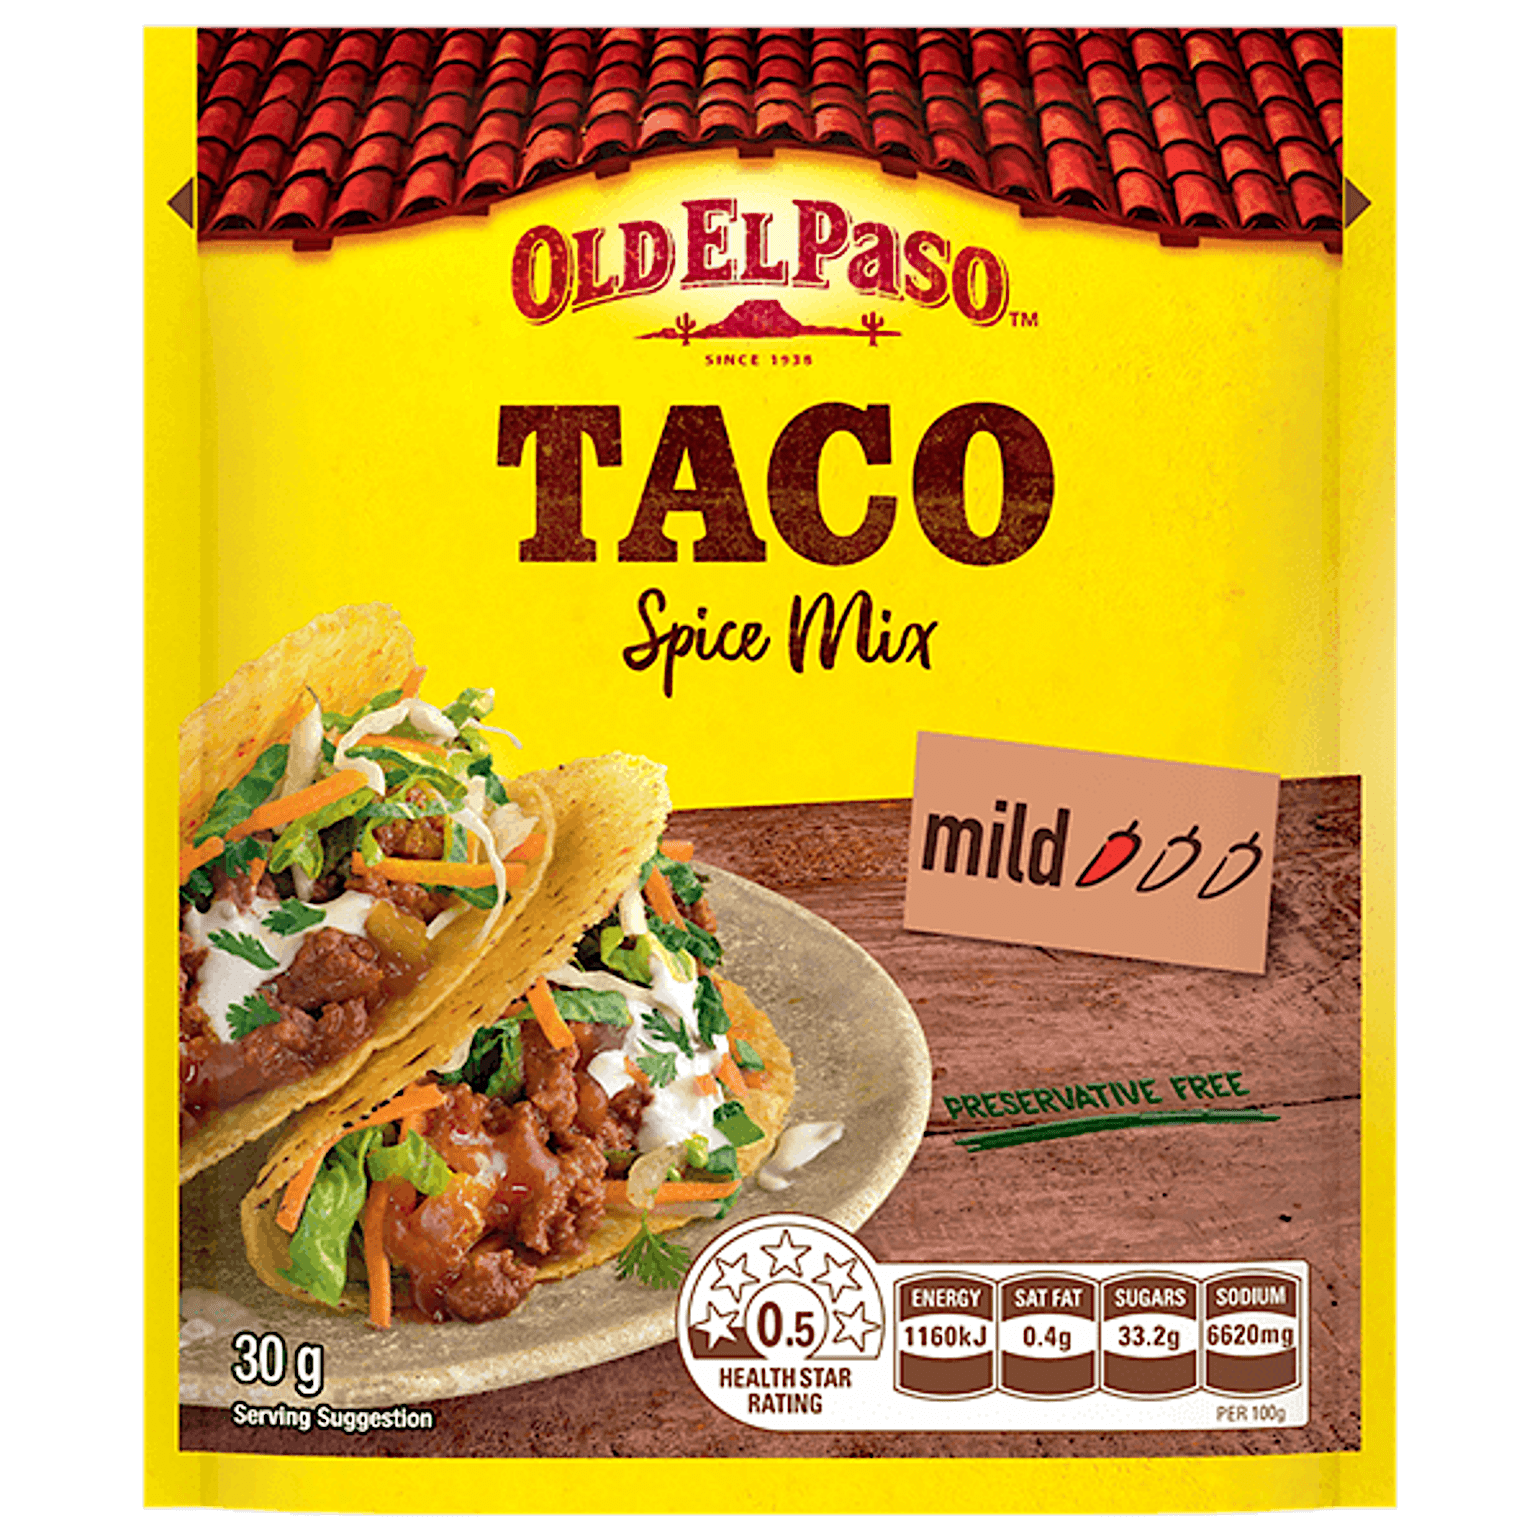 a pack of Old El Paso's taco spice mix mild (30g)